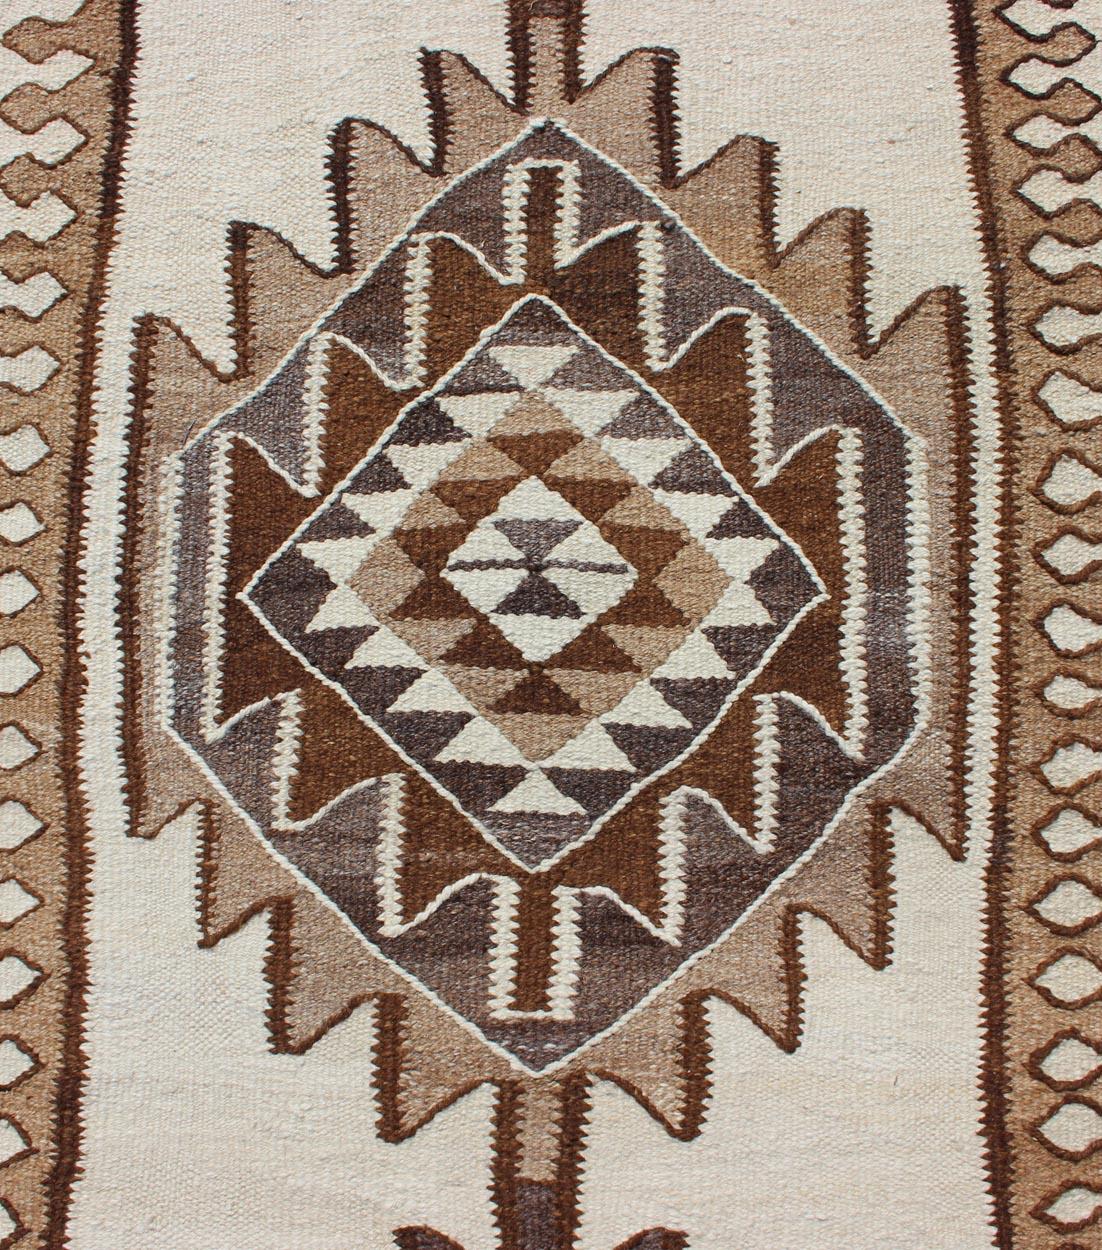 Vintage Turkish Kilim Runner with Tribal Medallions in Shades of Brown and Cream For Sale 1